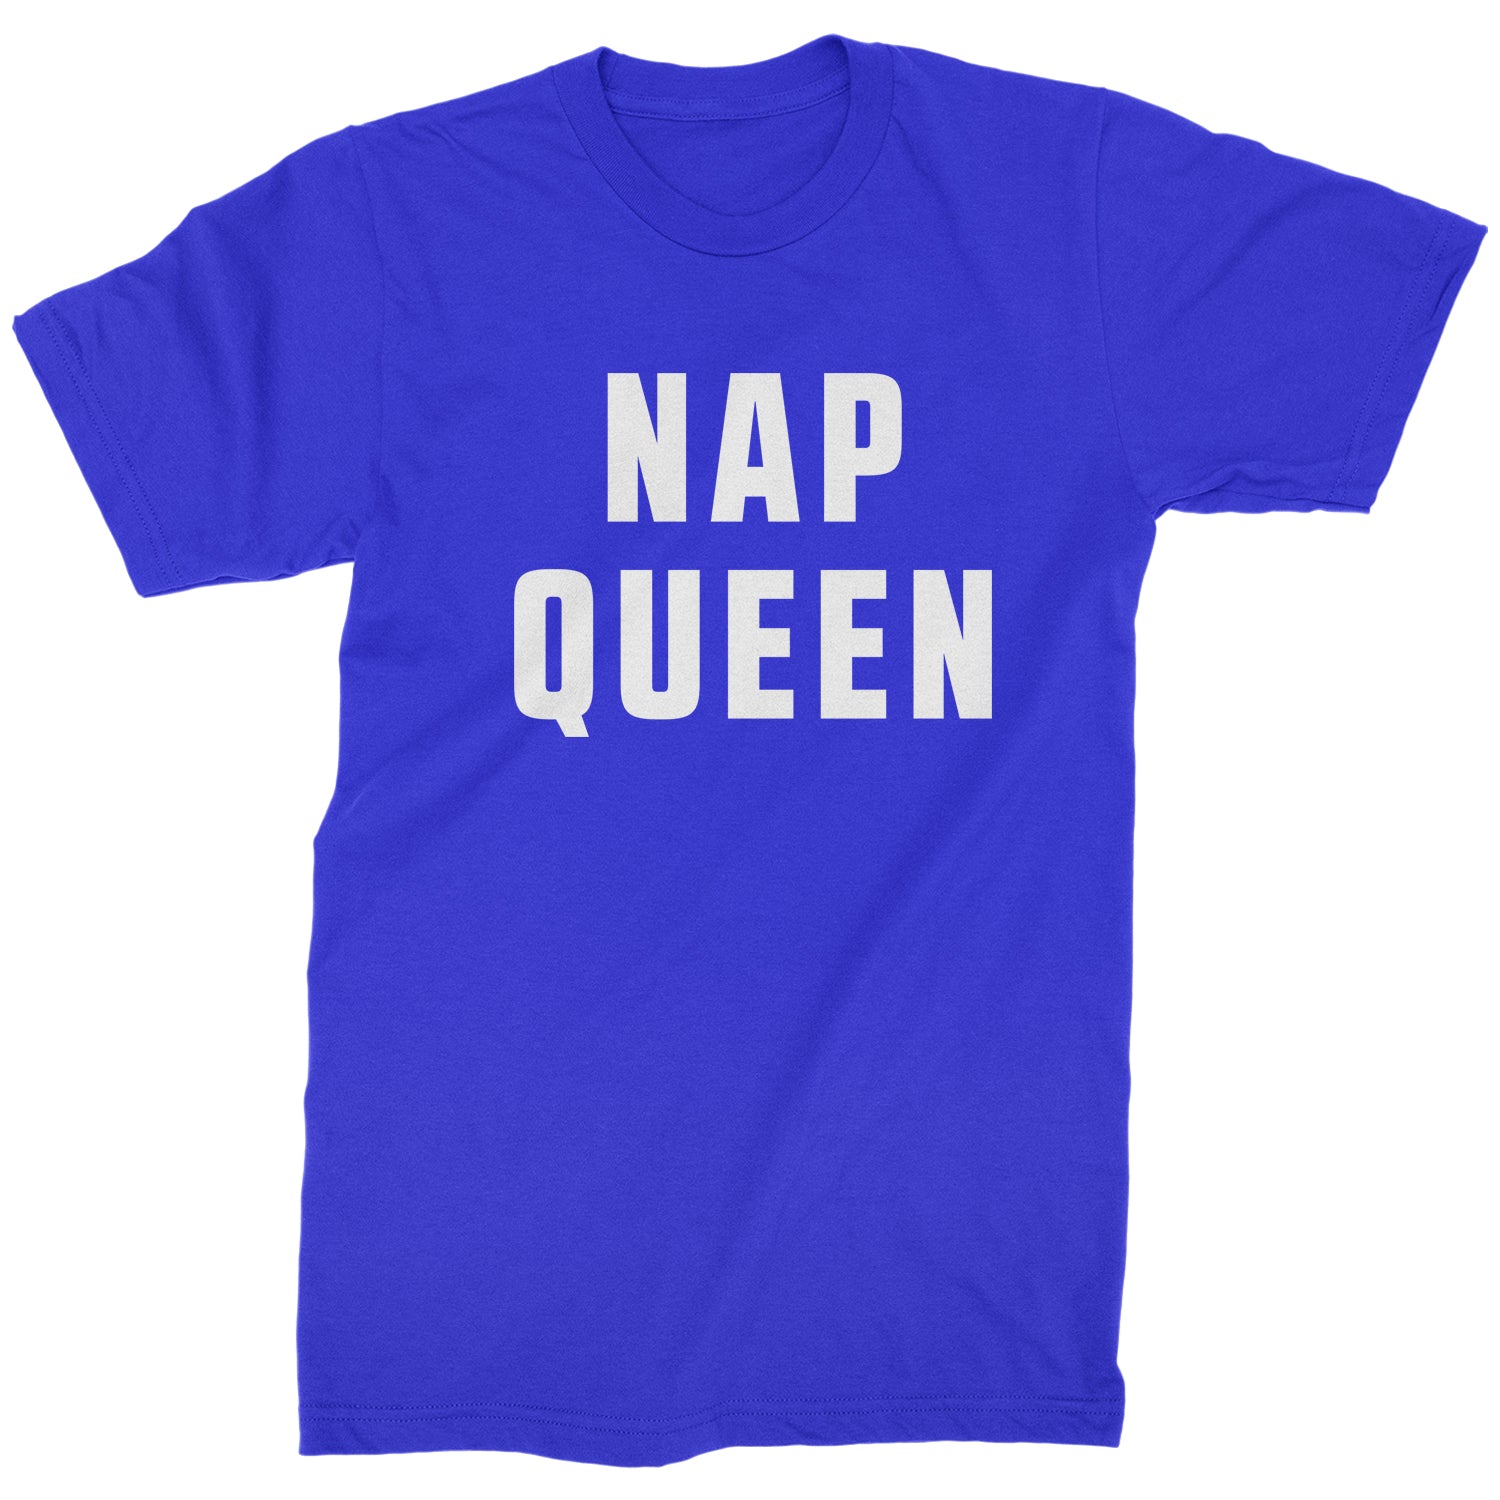 Nap Queen (White Print) Comfy Top For Lazy Days Mens T-shirt all, day, function, lazy, nap, pajamas, queen, siesta, sleep, tired, to, too by Expression Tees